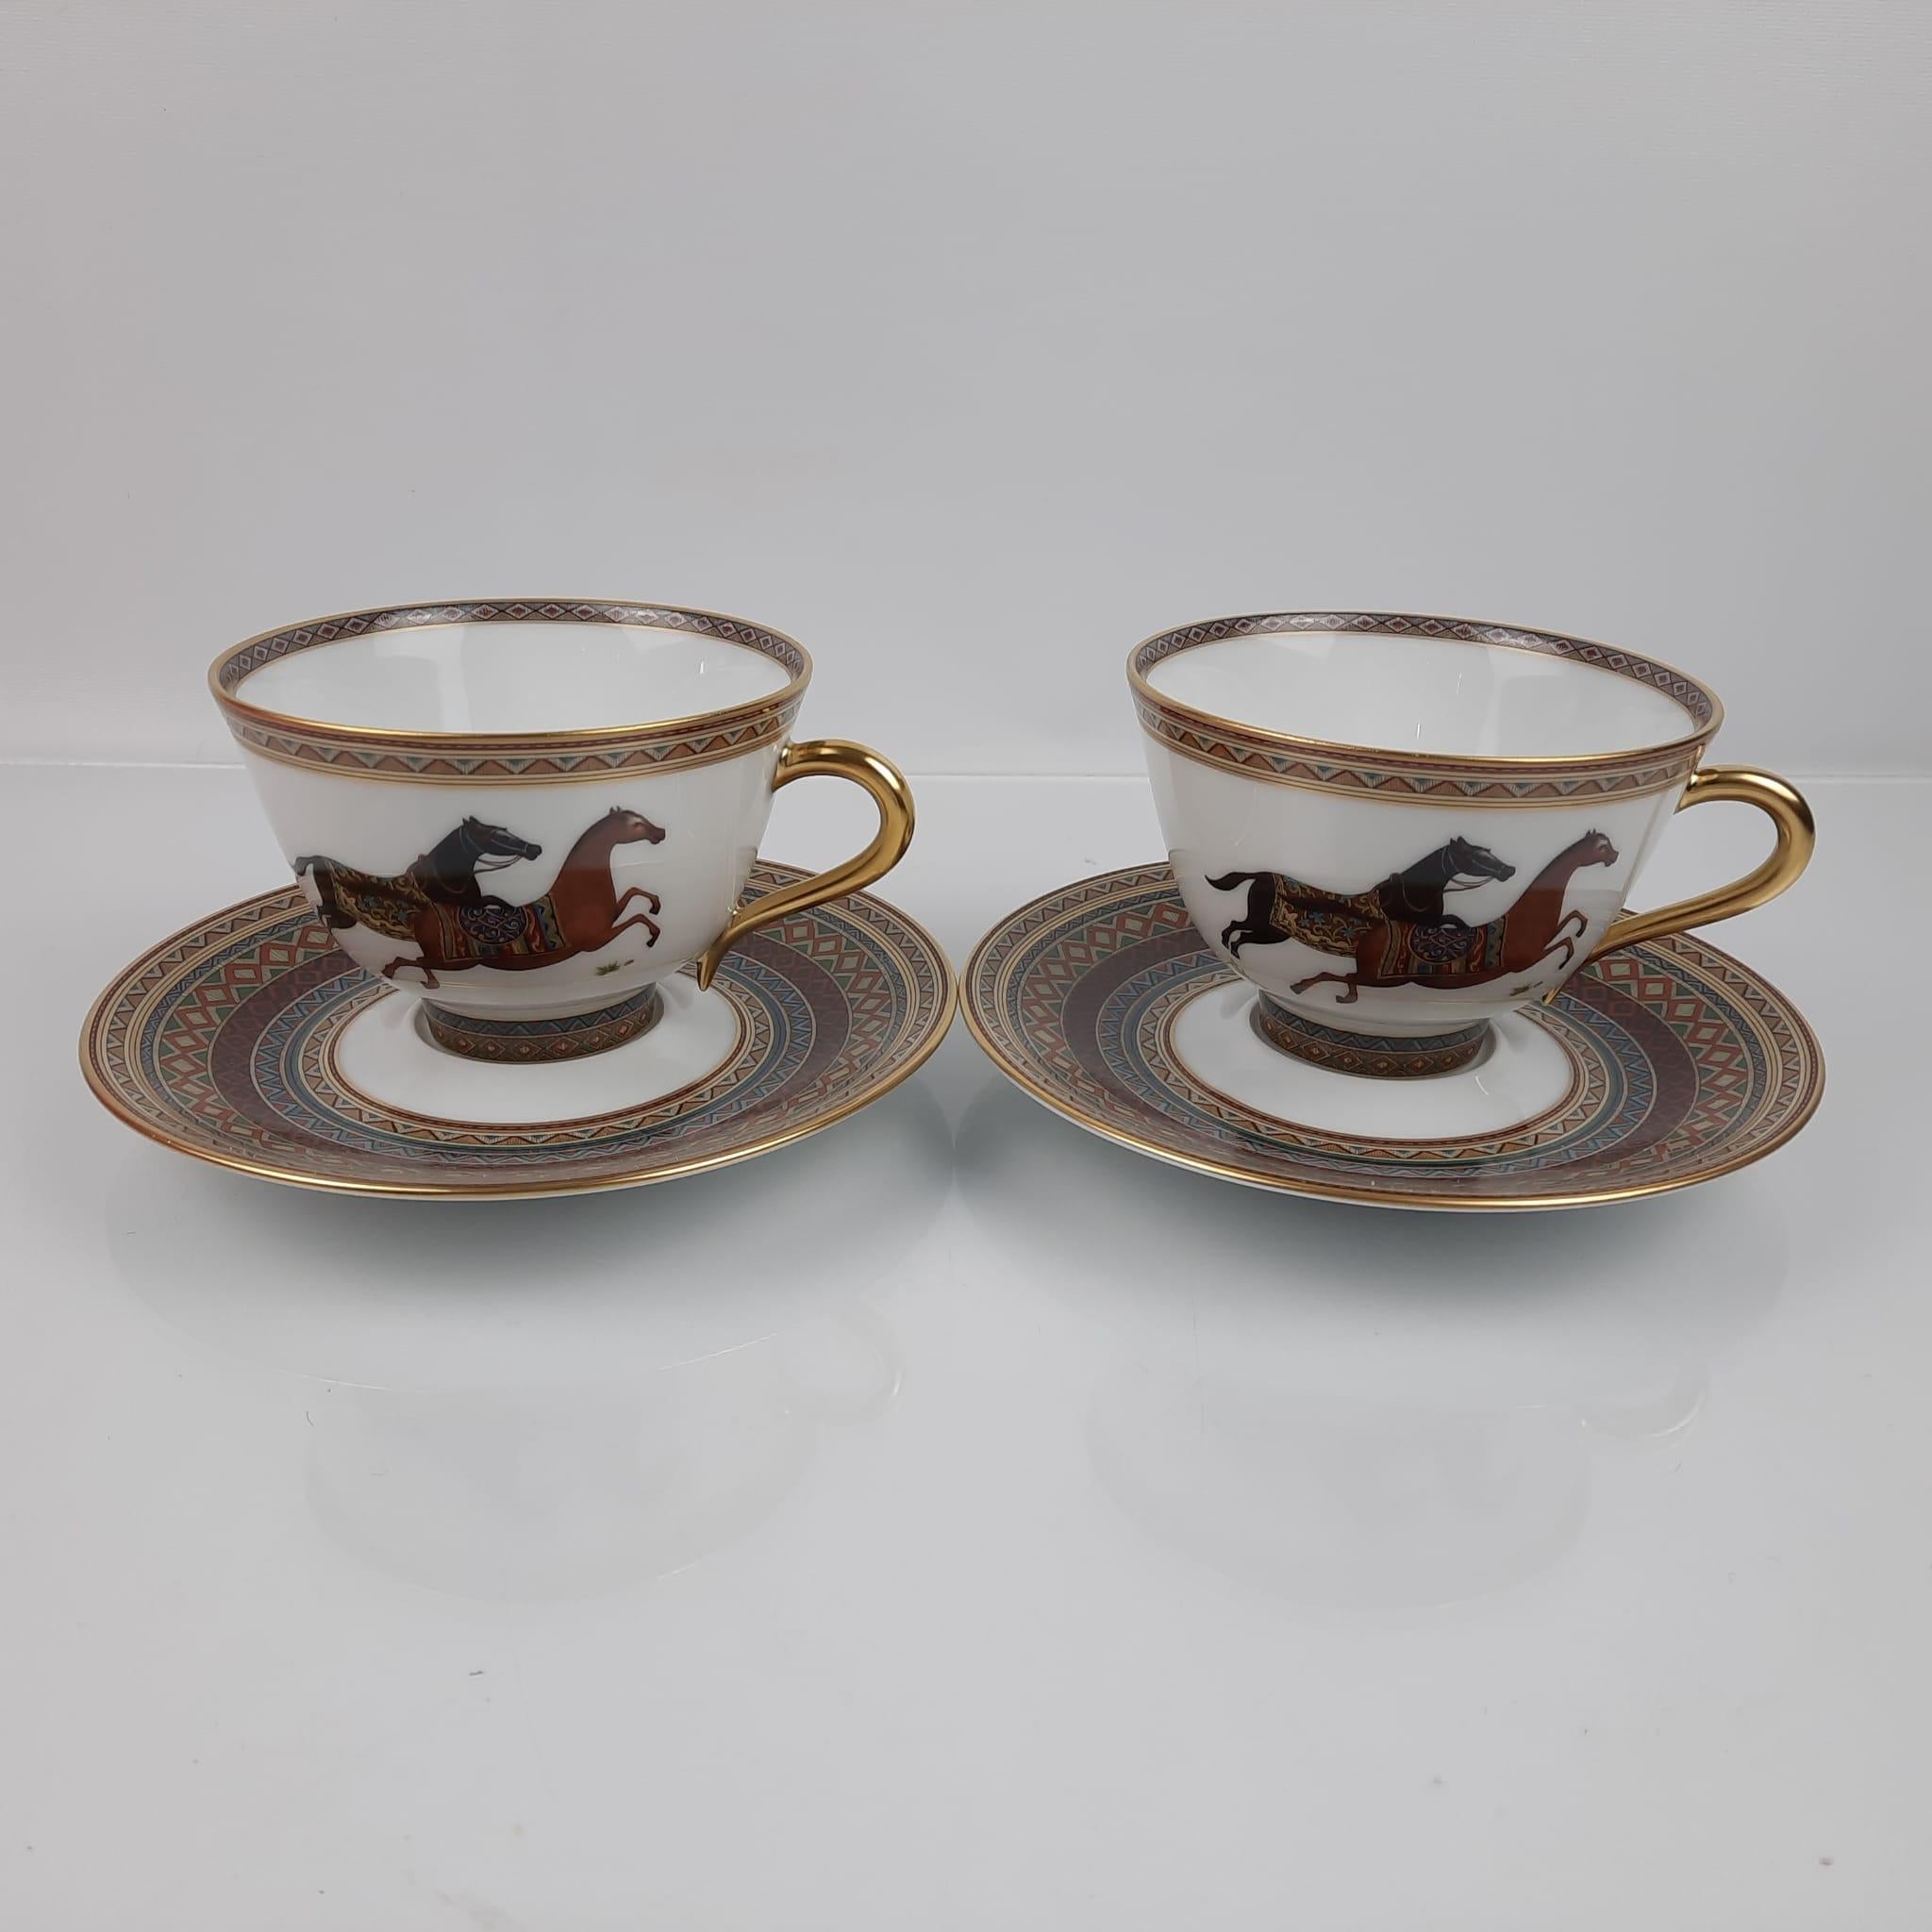 Hermes Cheval d'Orient tea cup and saucer Porcelain Set of Two 23cl 1